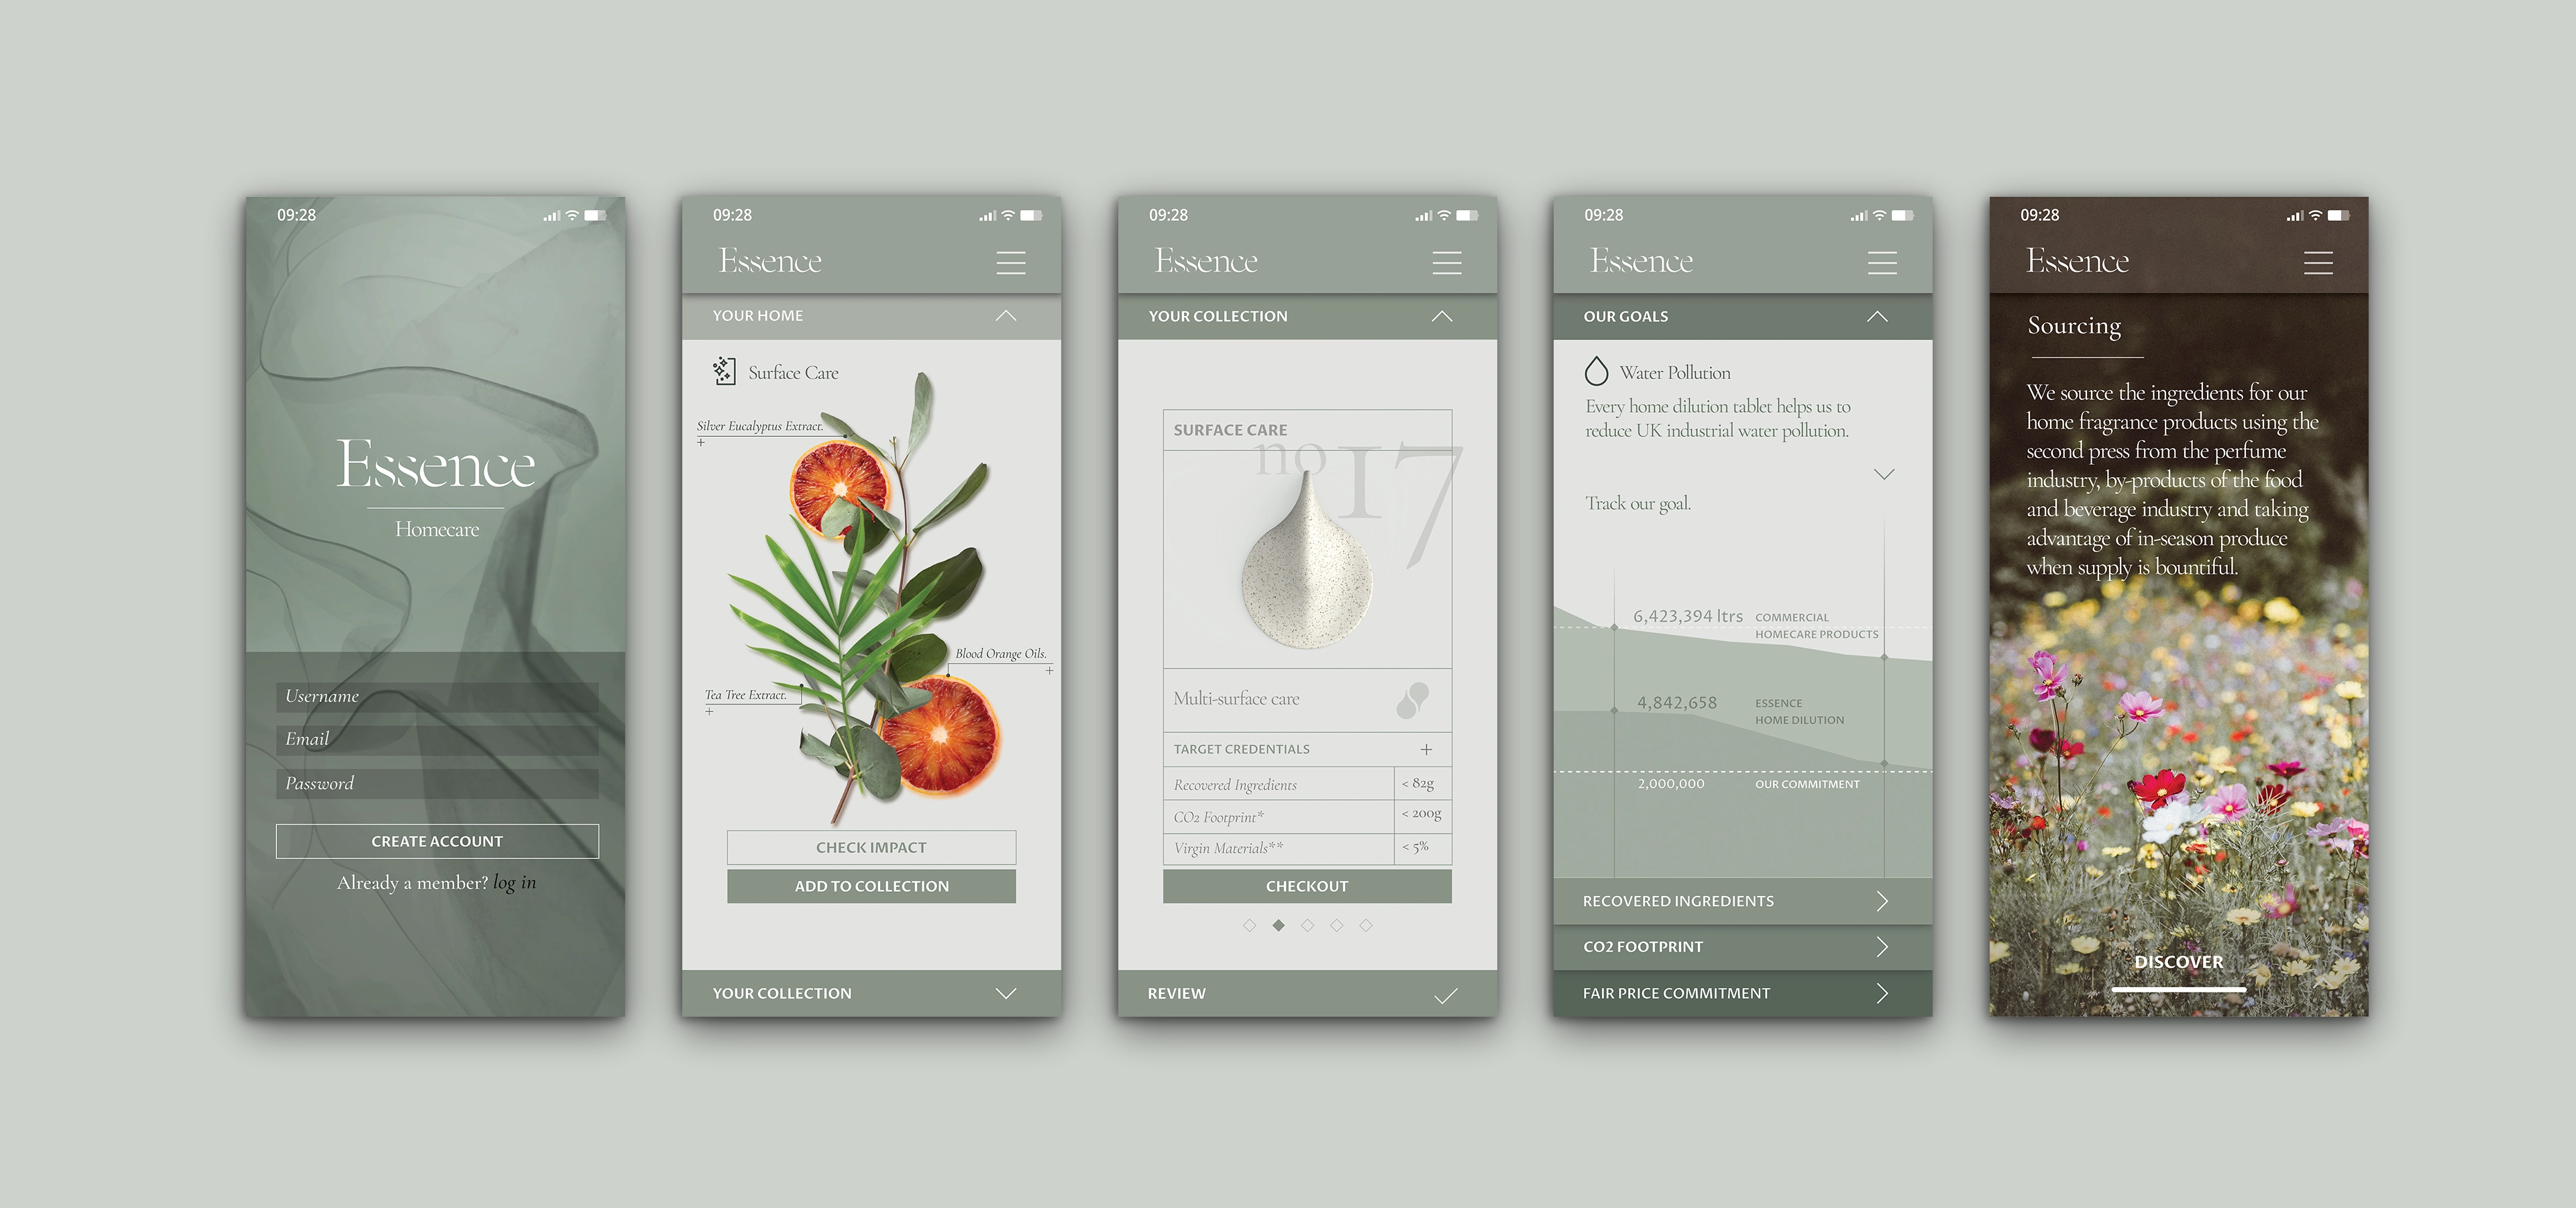 App screens for the Essence digital experience